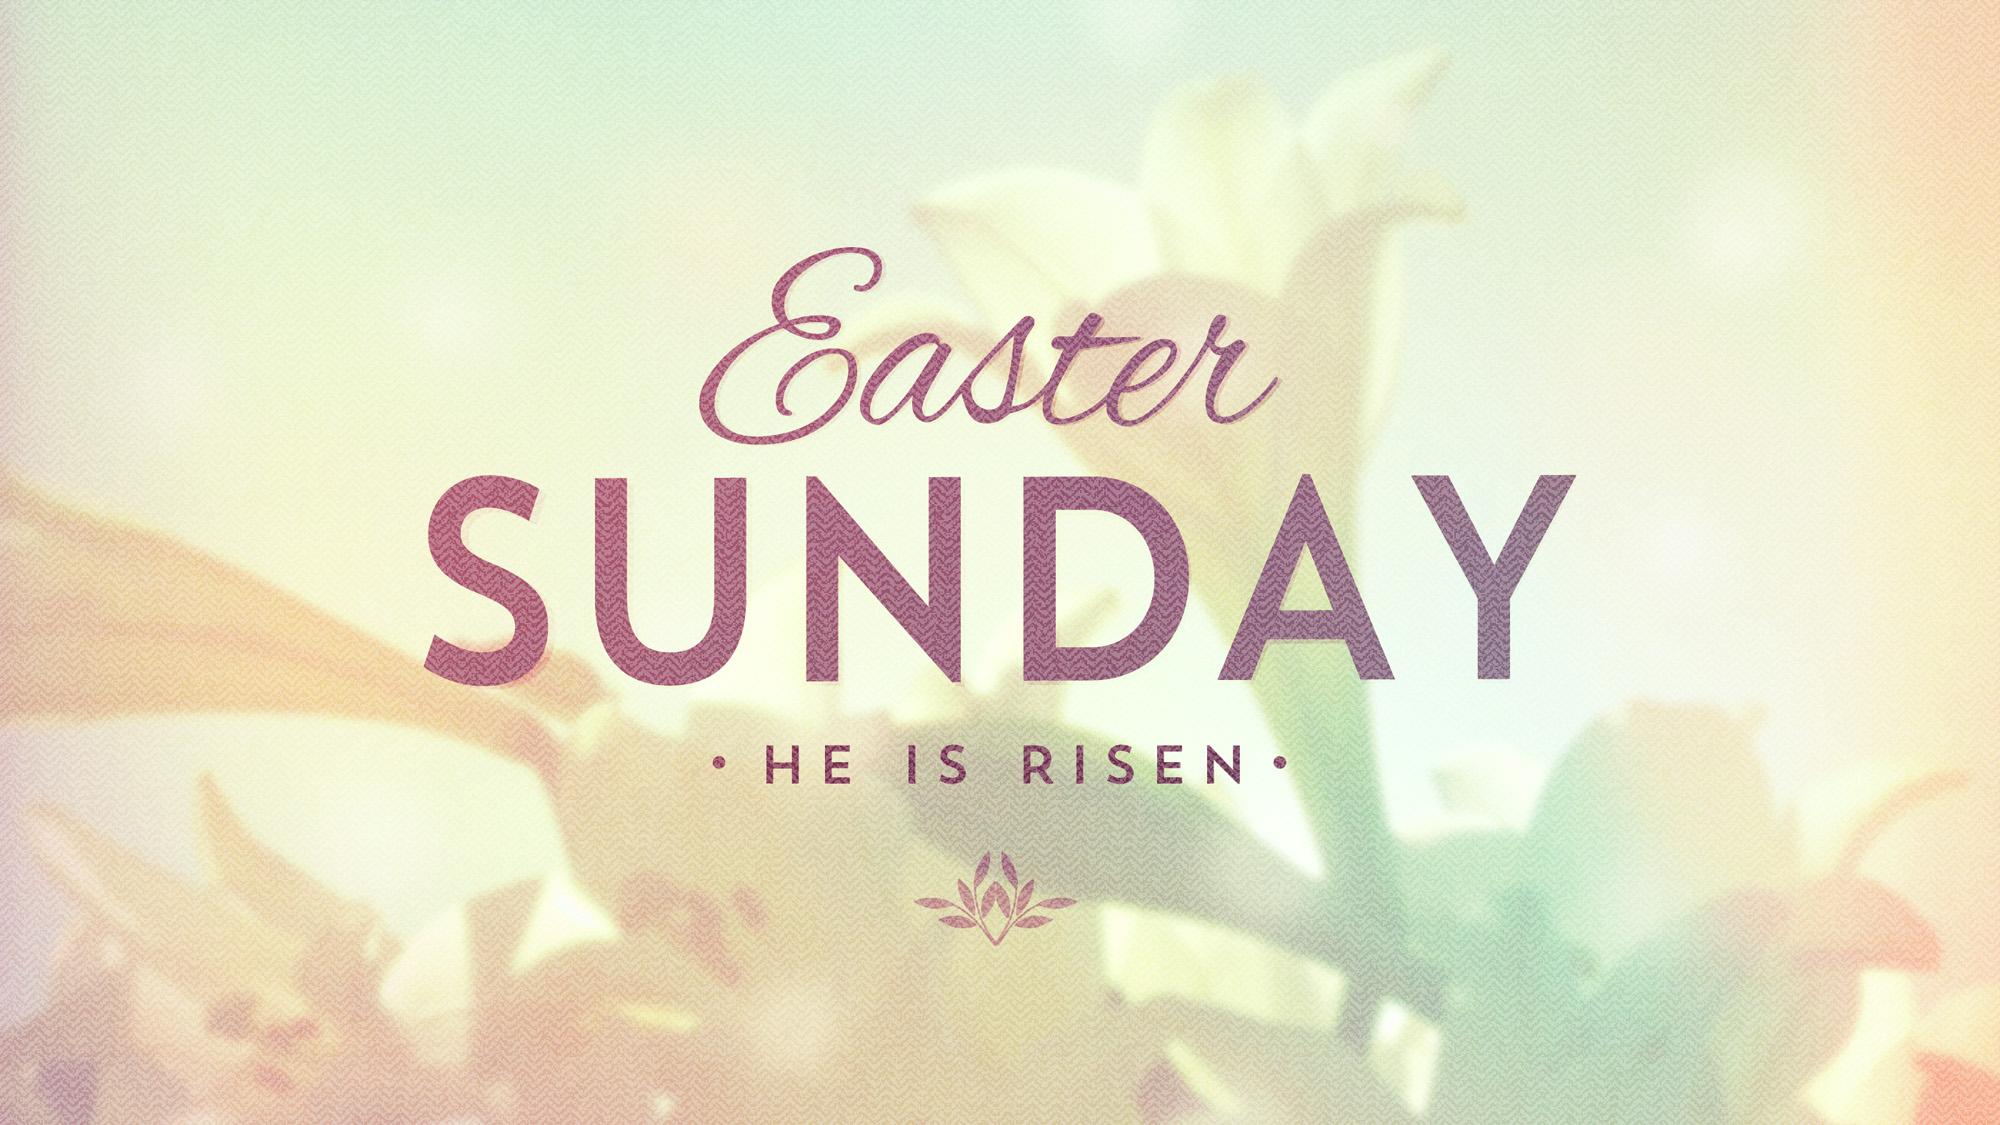 Wishes Happy Easter Sunday Quotes, Image, Picture, Messages